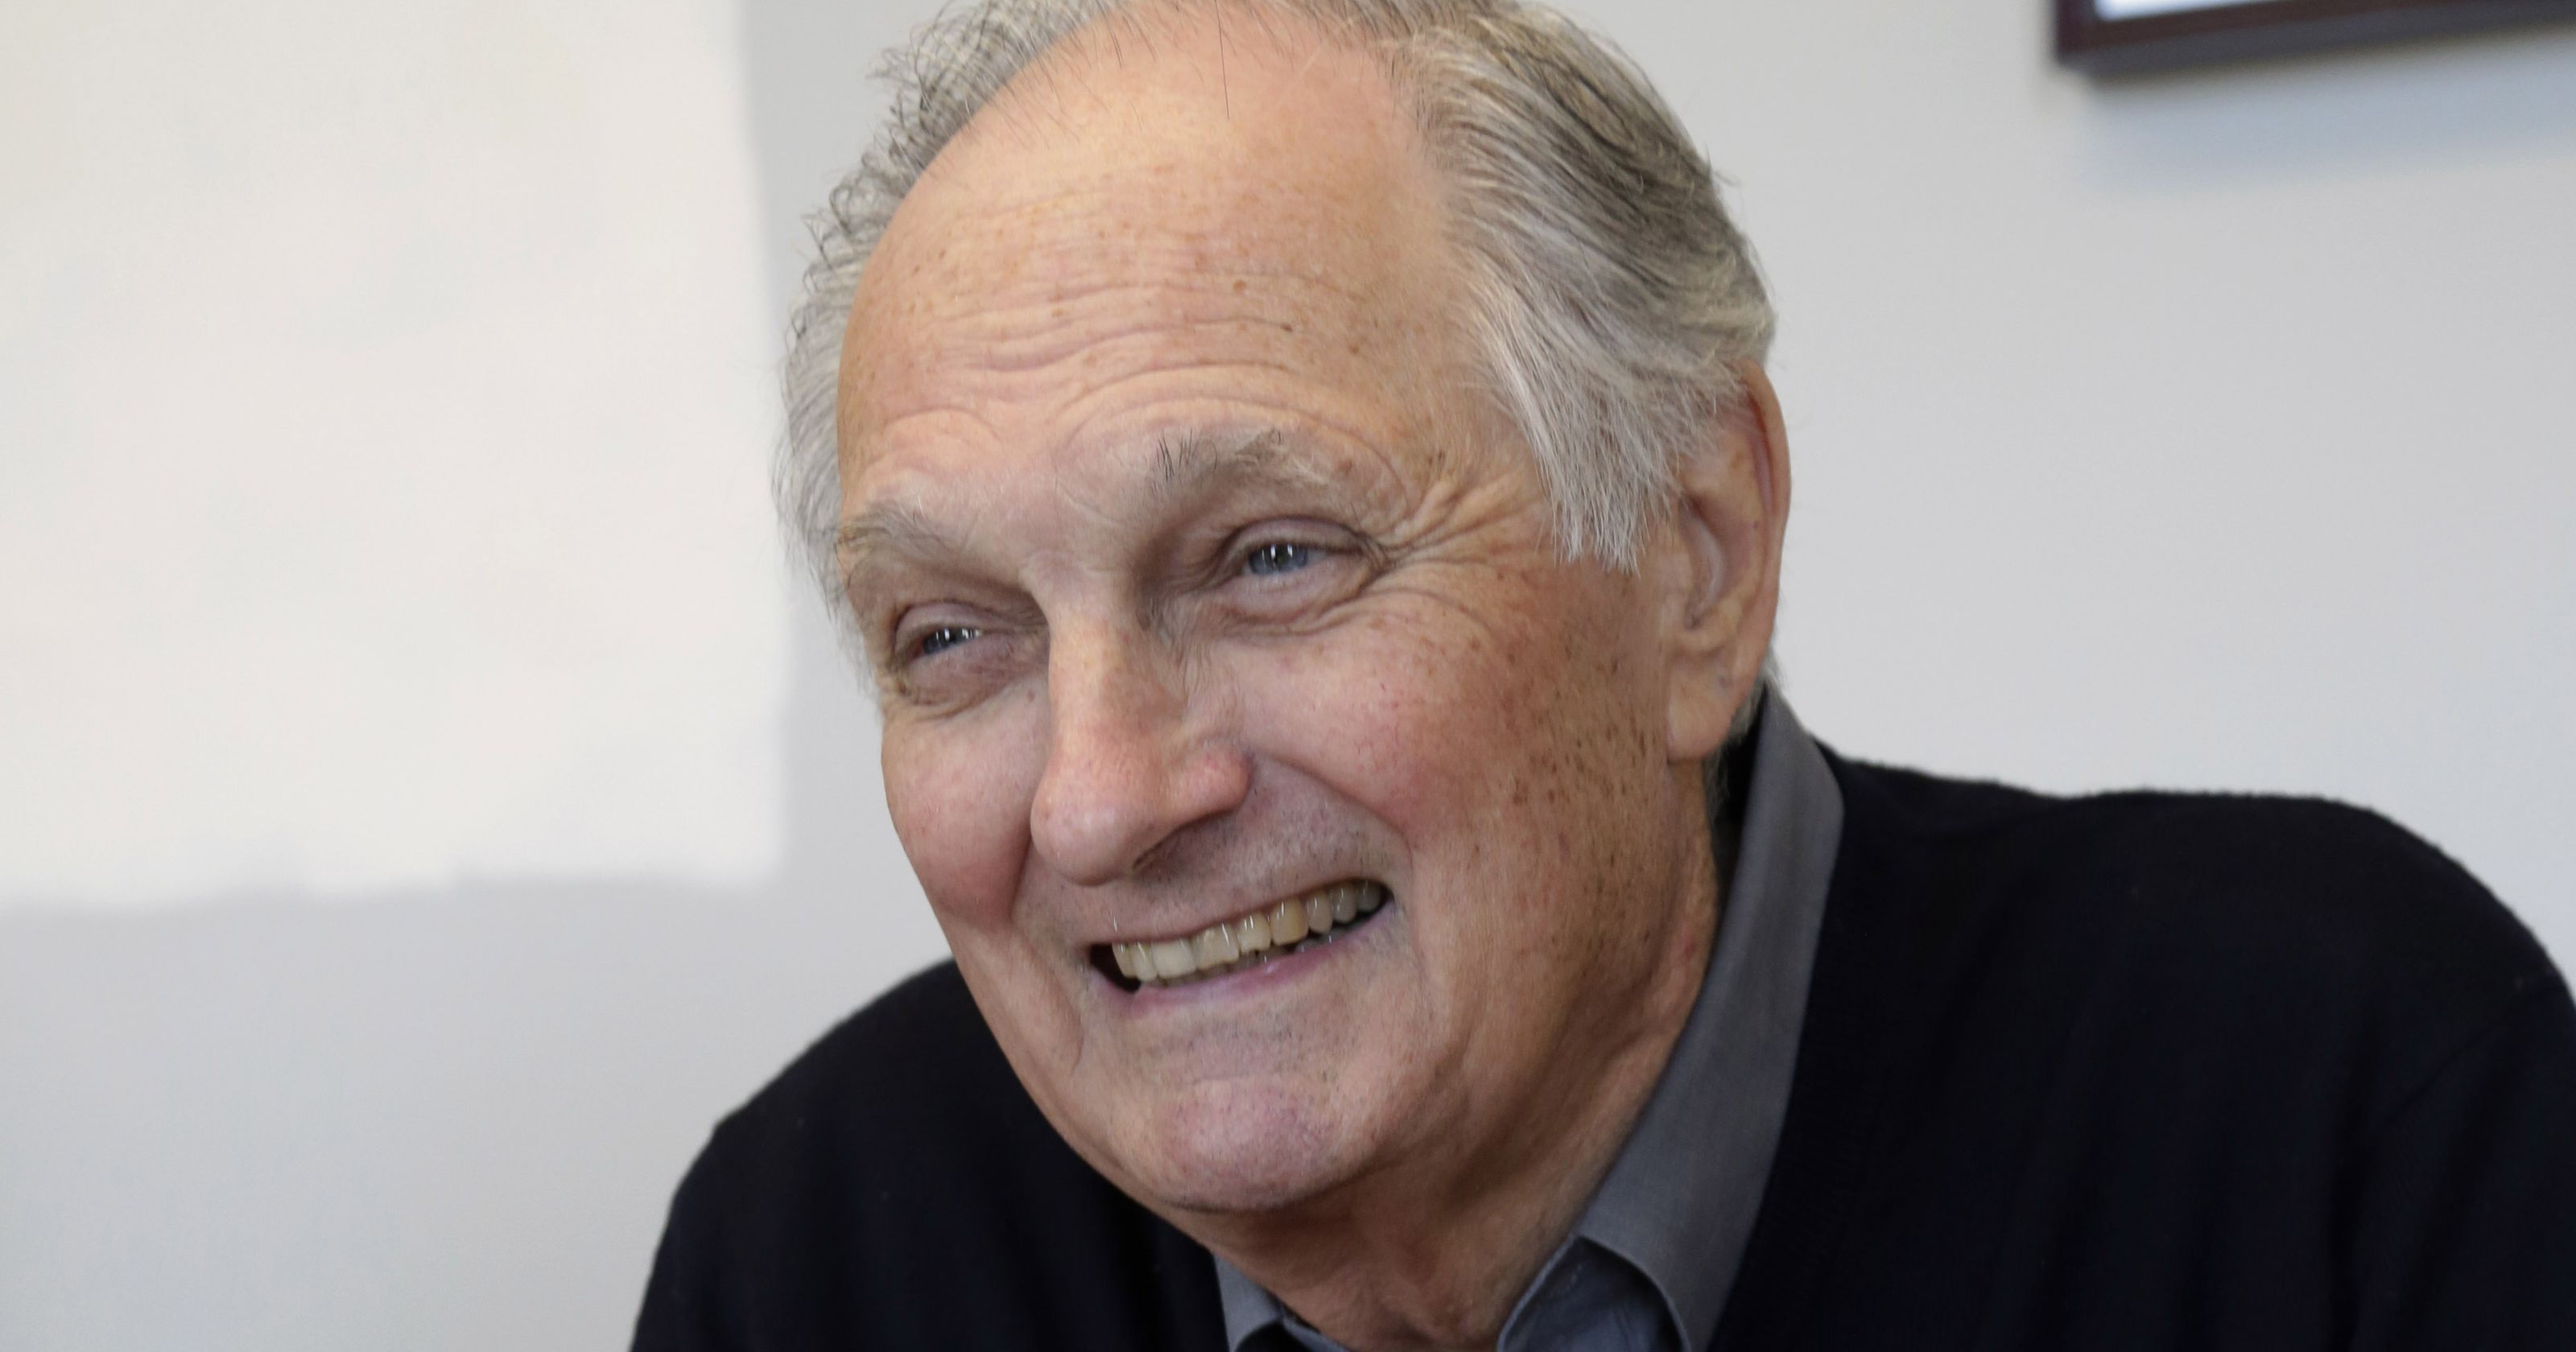 Alan Alda will visit Nashville with his new book